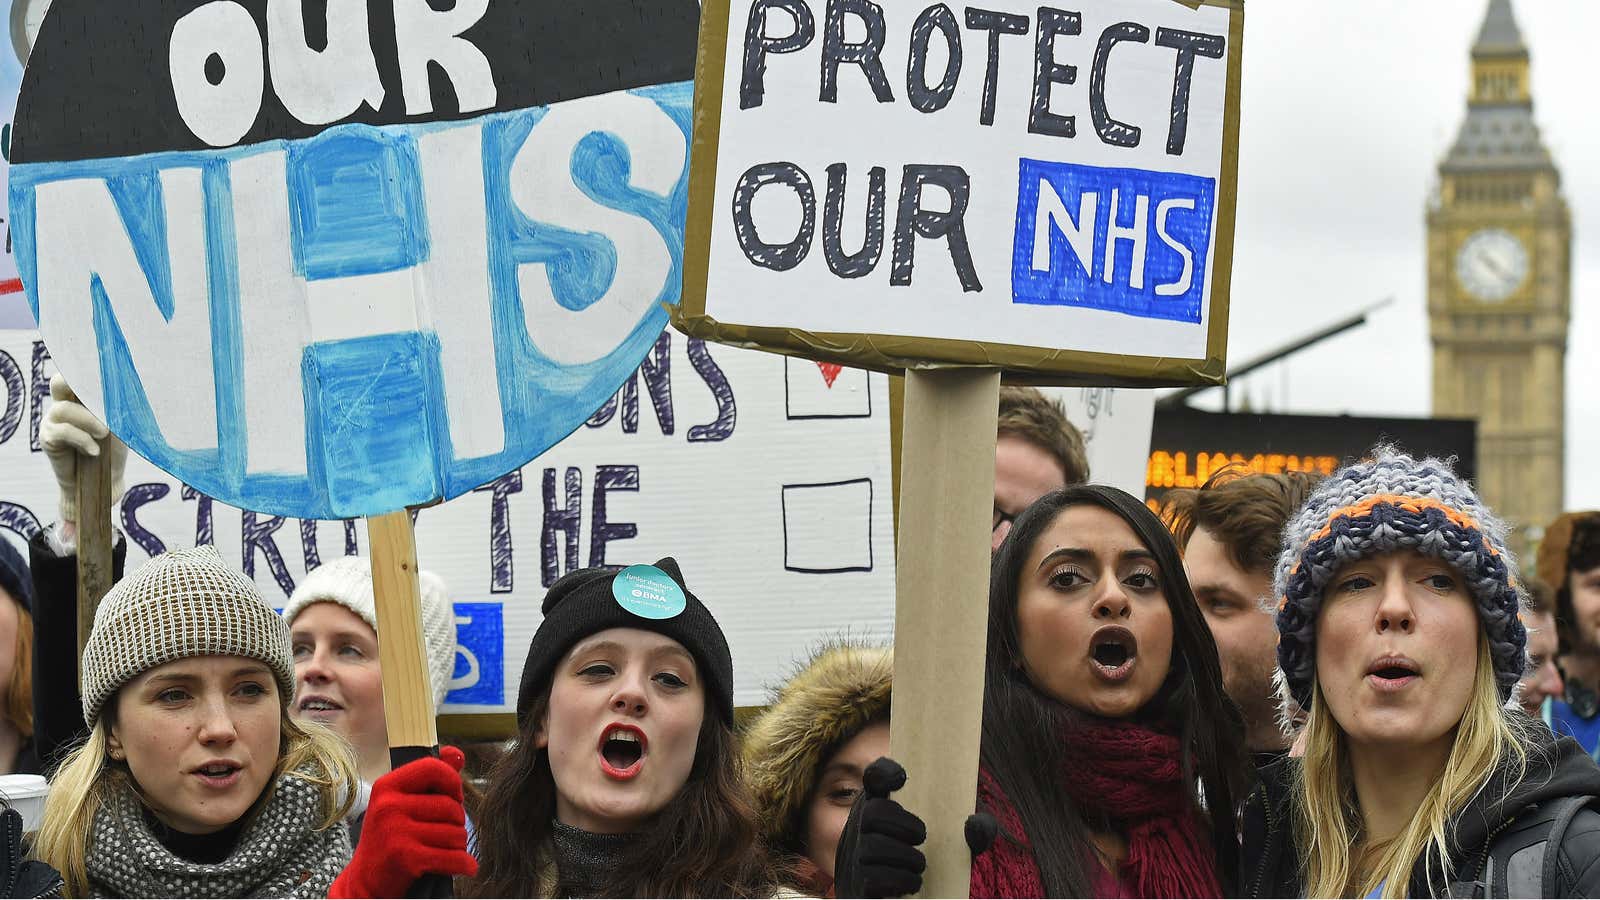 “Protect our NHS.”